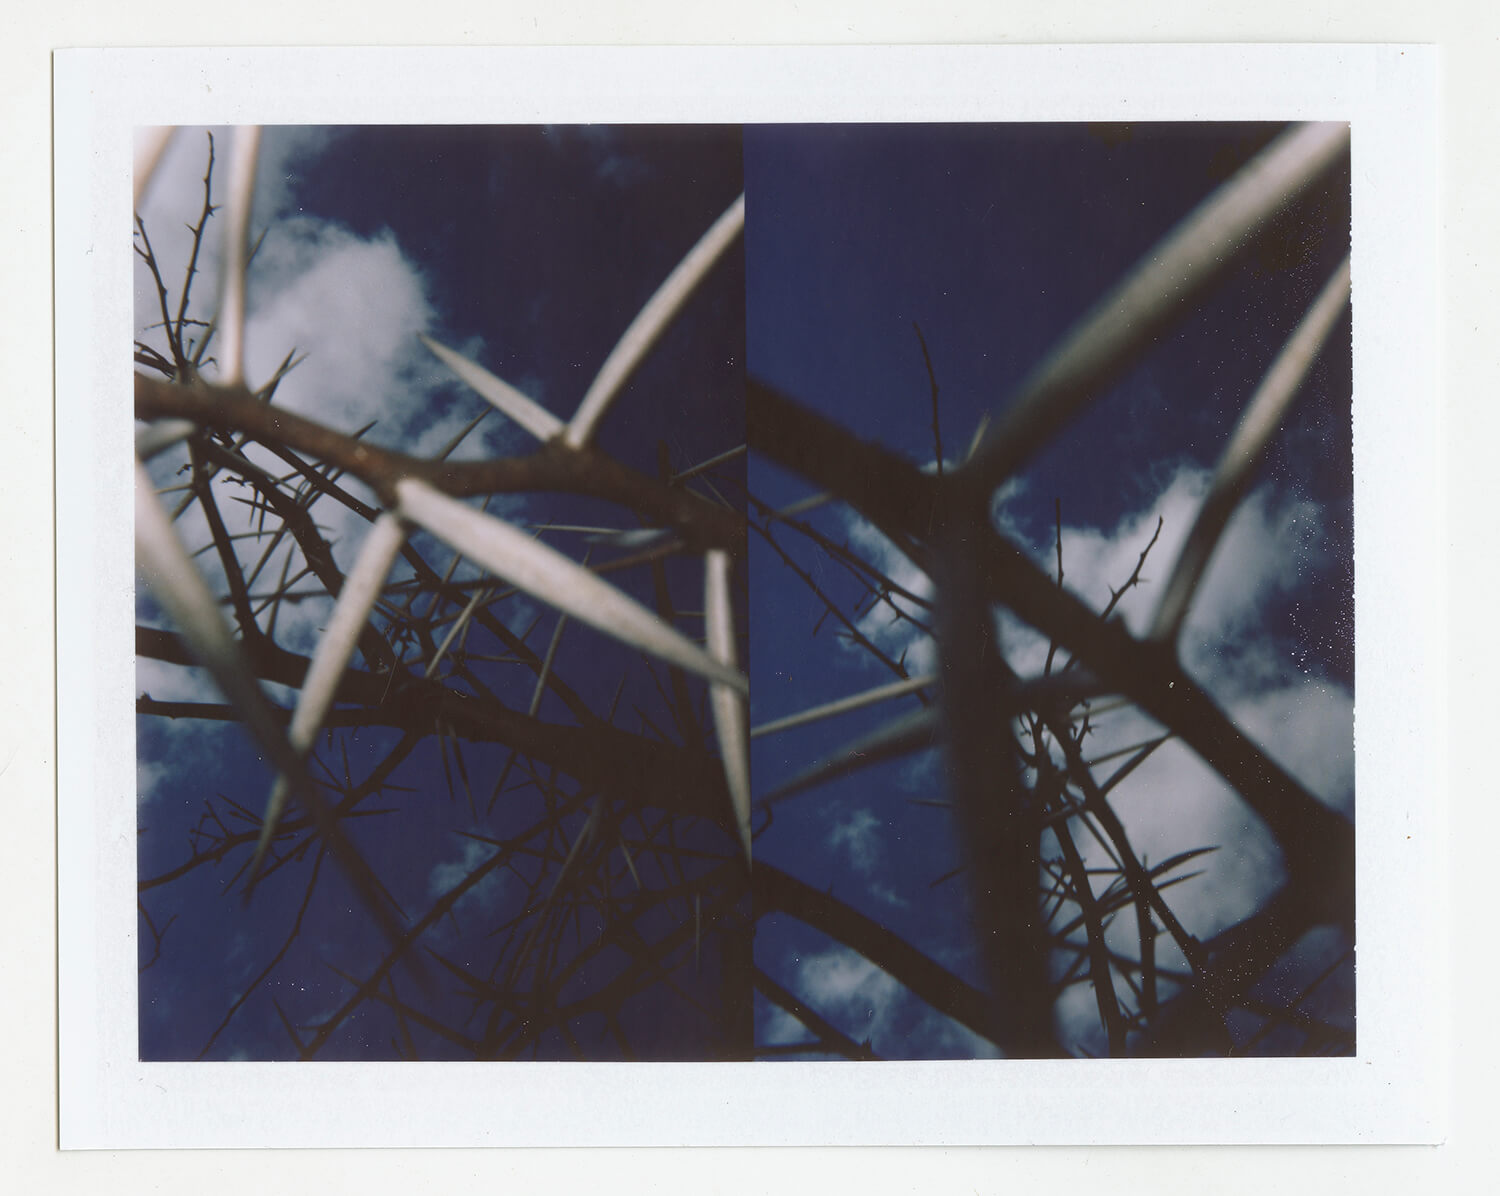  I.D.067, The Polaroid Revolutionary Workers, 2013, Polaroid Picture, 107mm x 86mm 